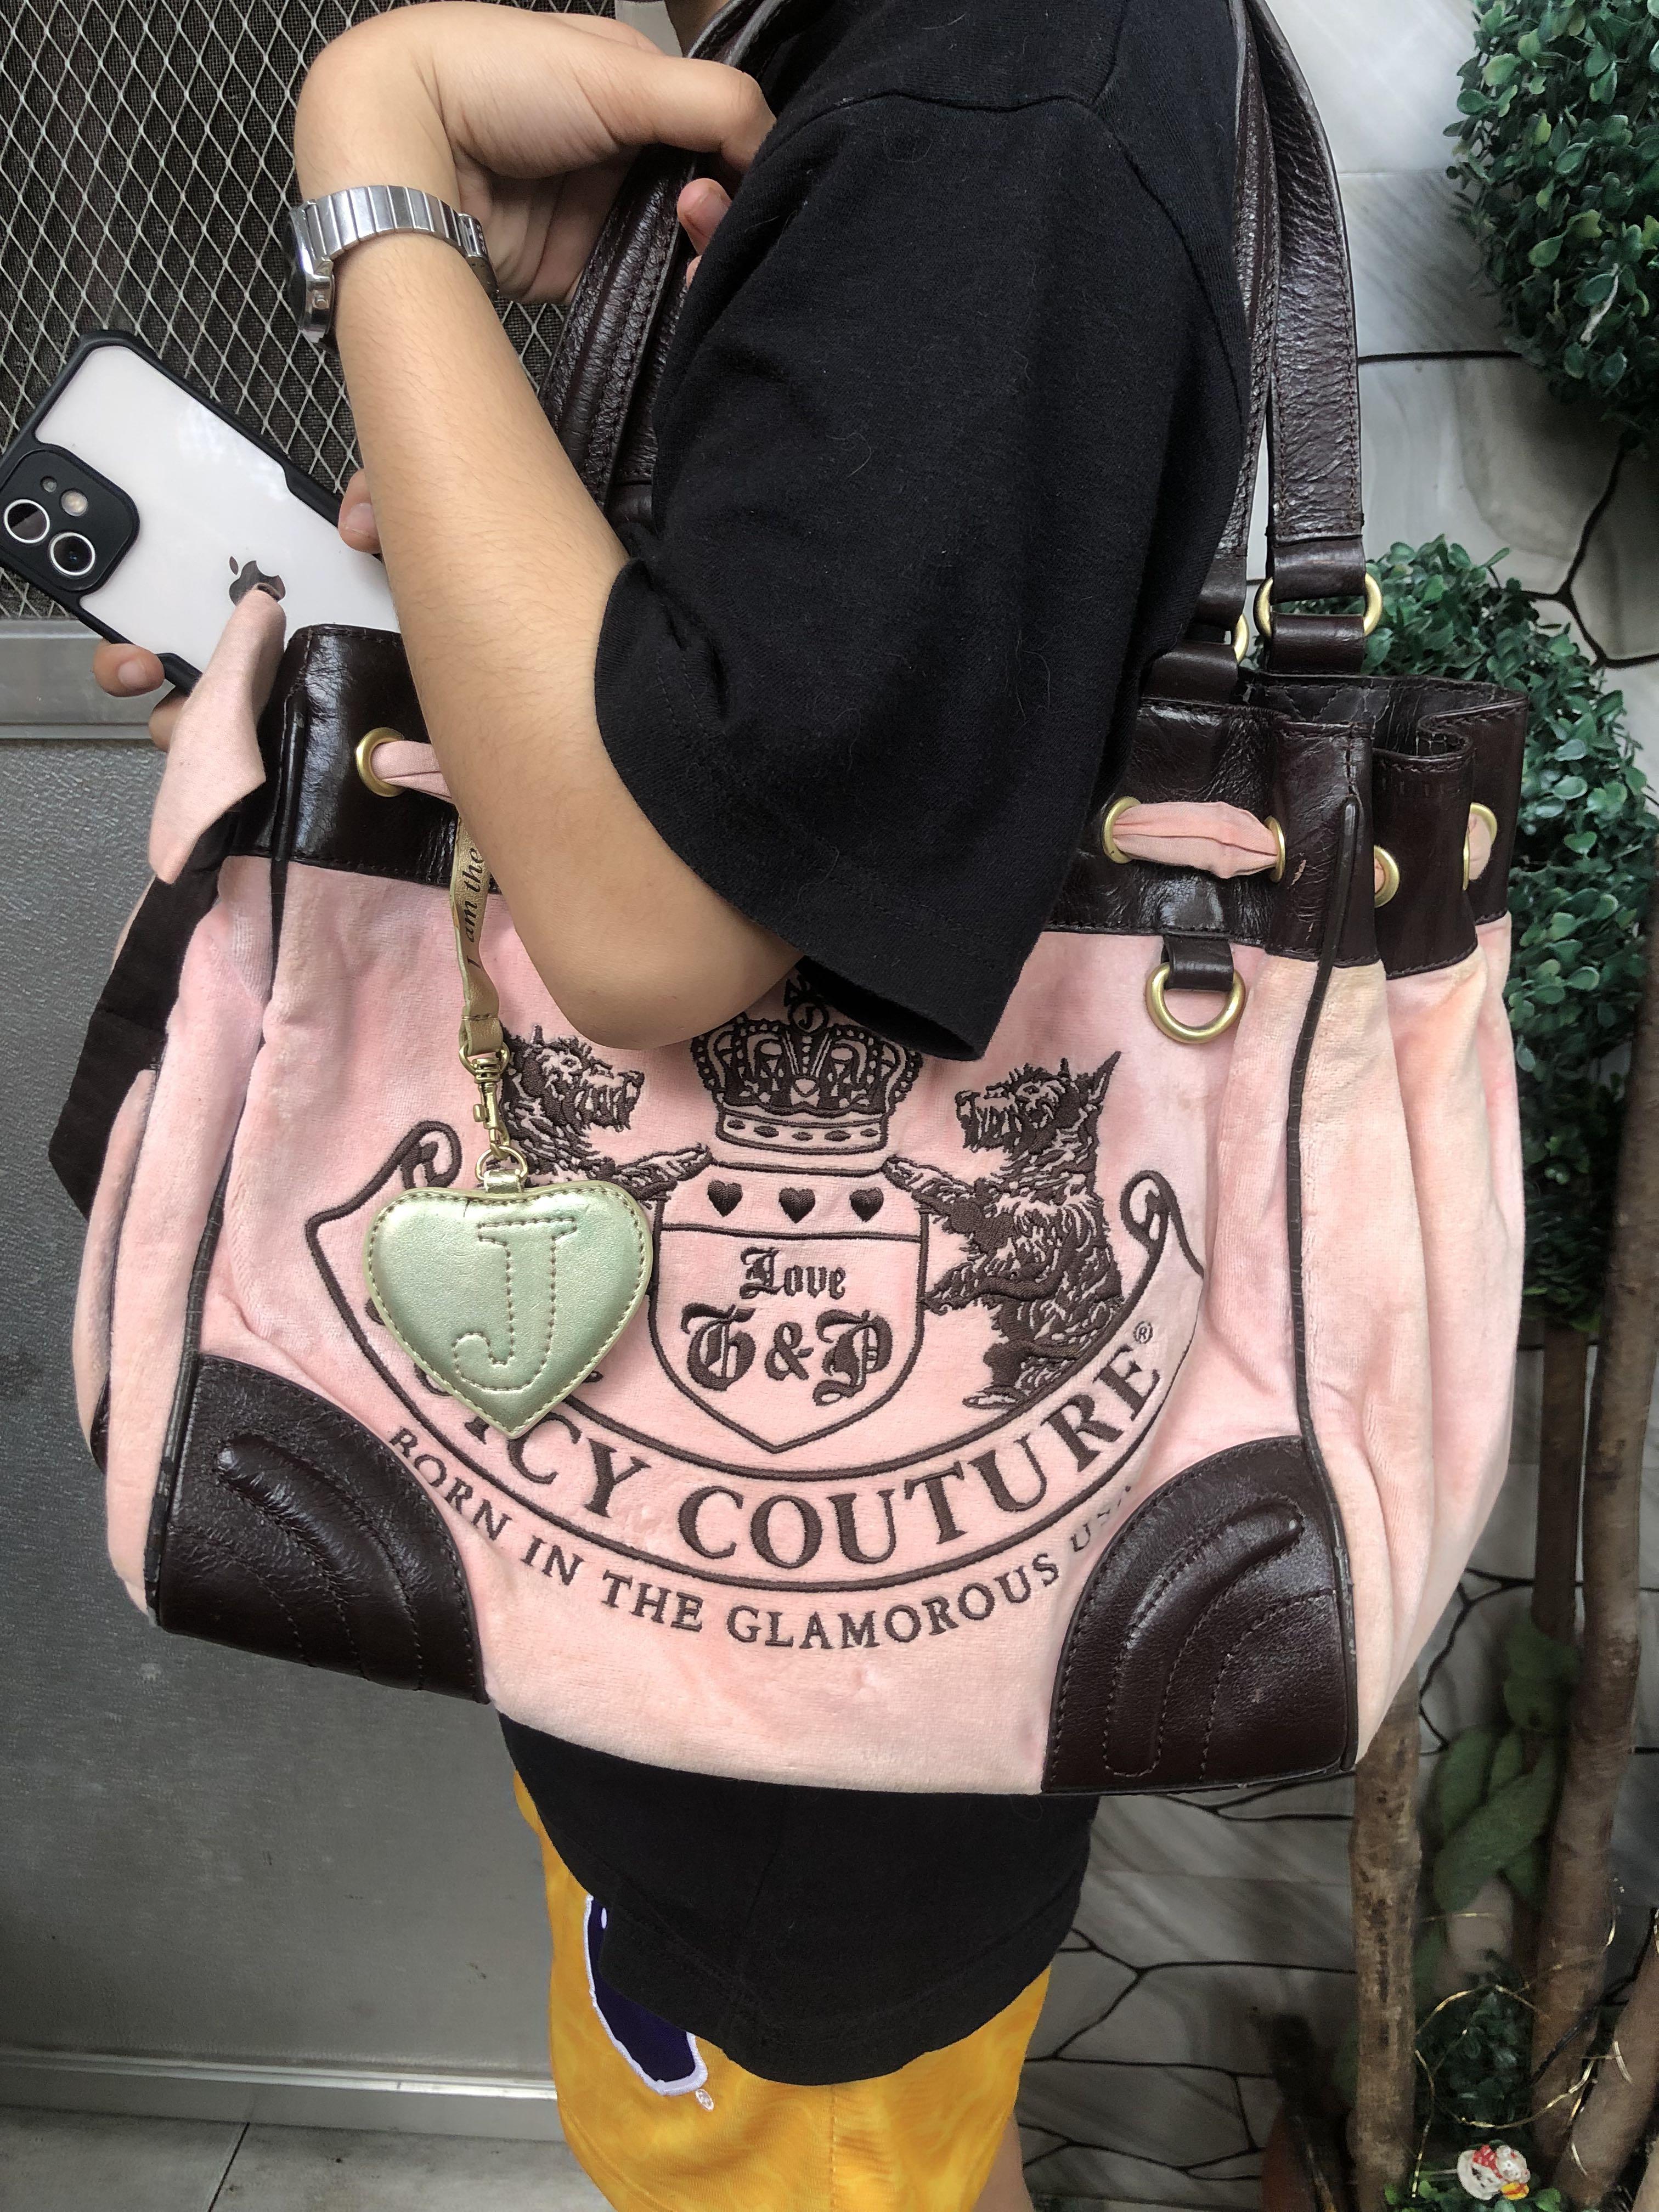 Share 78+ juicy couture daydreamer bag latest - esthdonghoadian